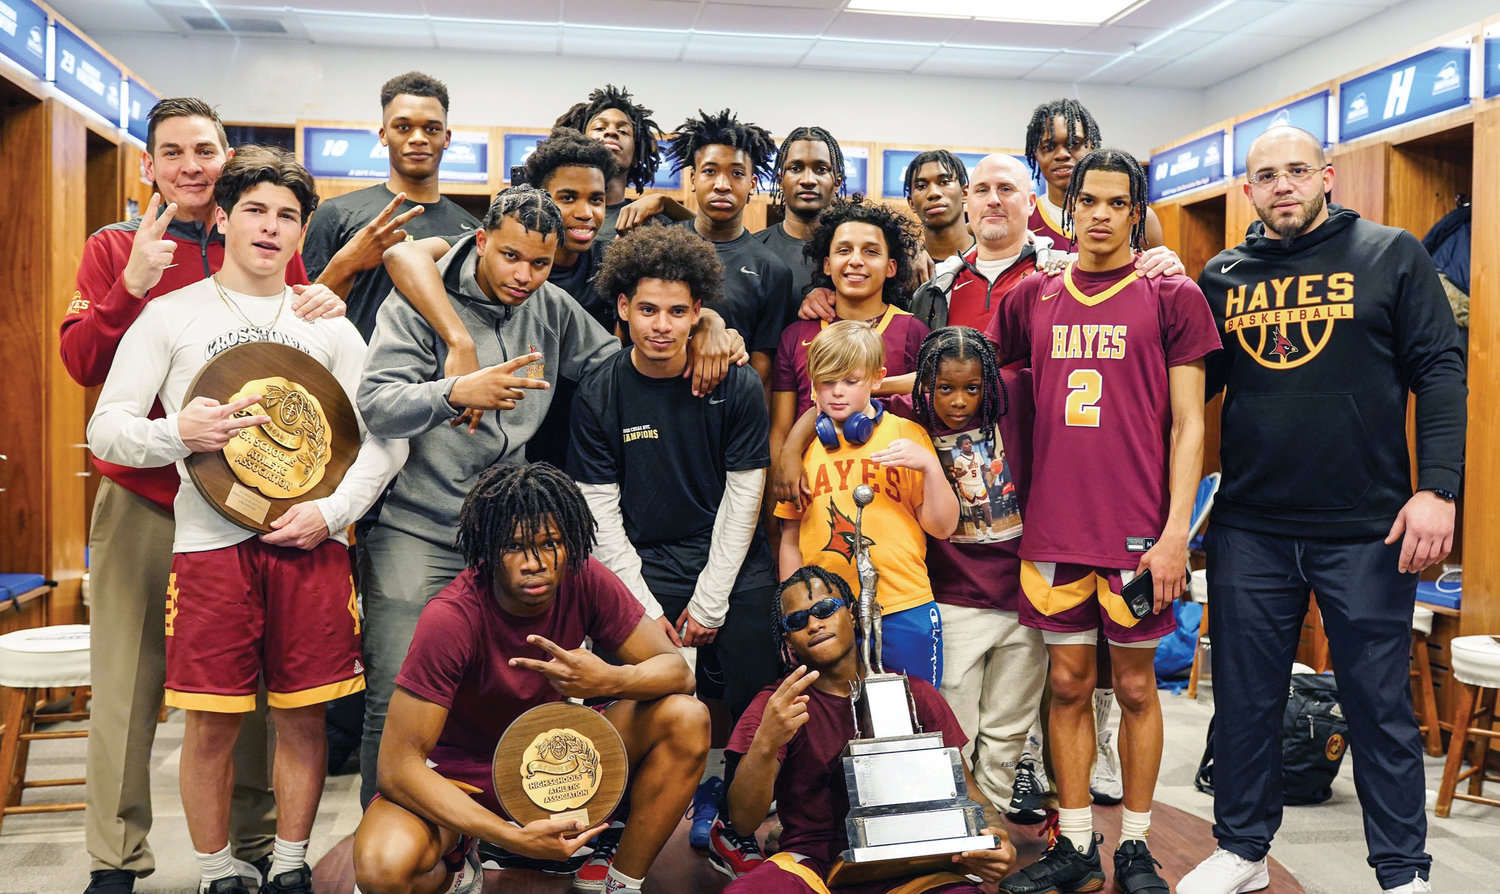 The Cardinal Hayes boys won CHSAA state championships at Hofstra University in Hempstead. They defeated Archbishop Stepinac, 79-59, for its first city and state championship since 2017 March 11.